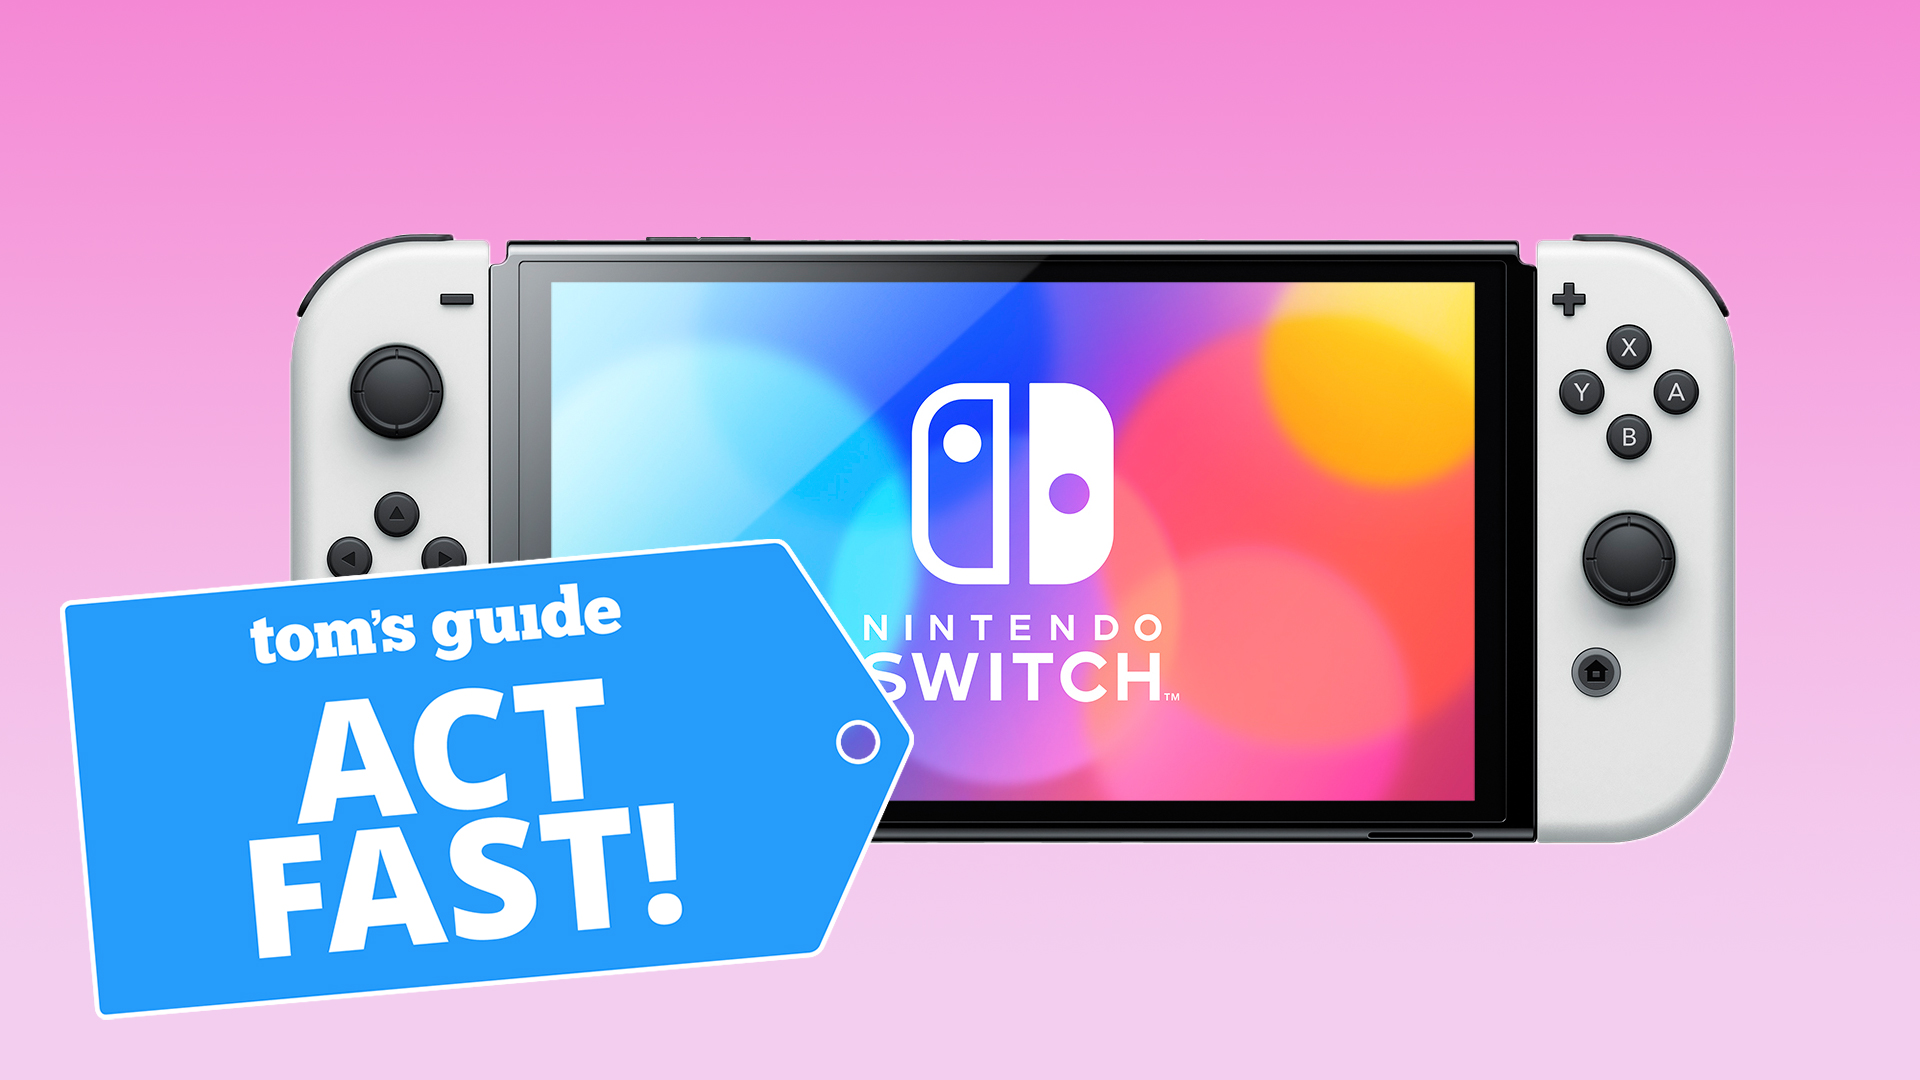 Nintendo Switch OLED price: get it for less than $349.99 today